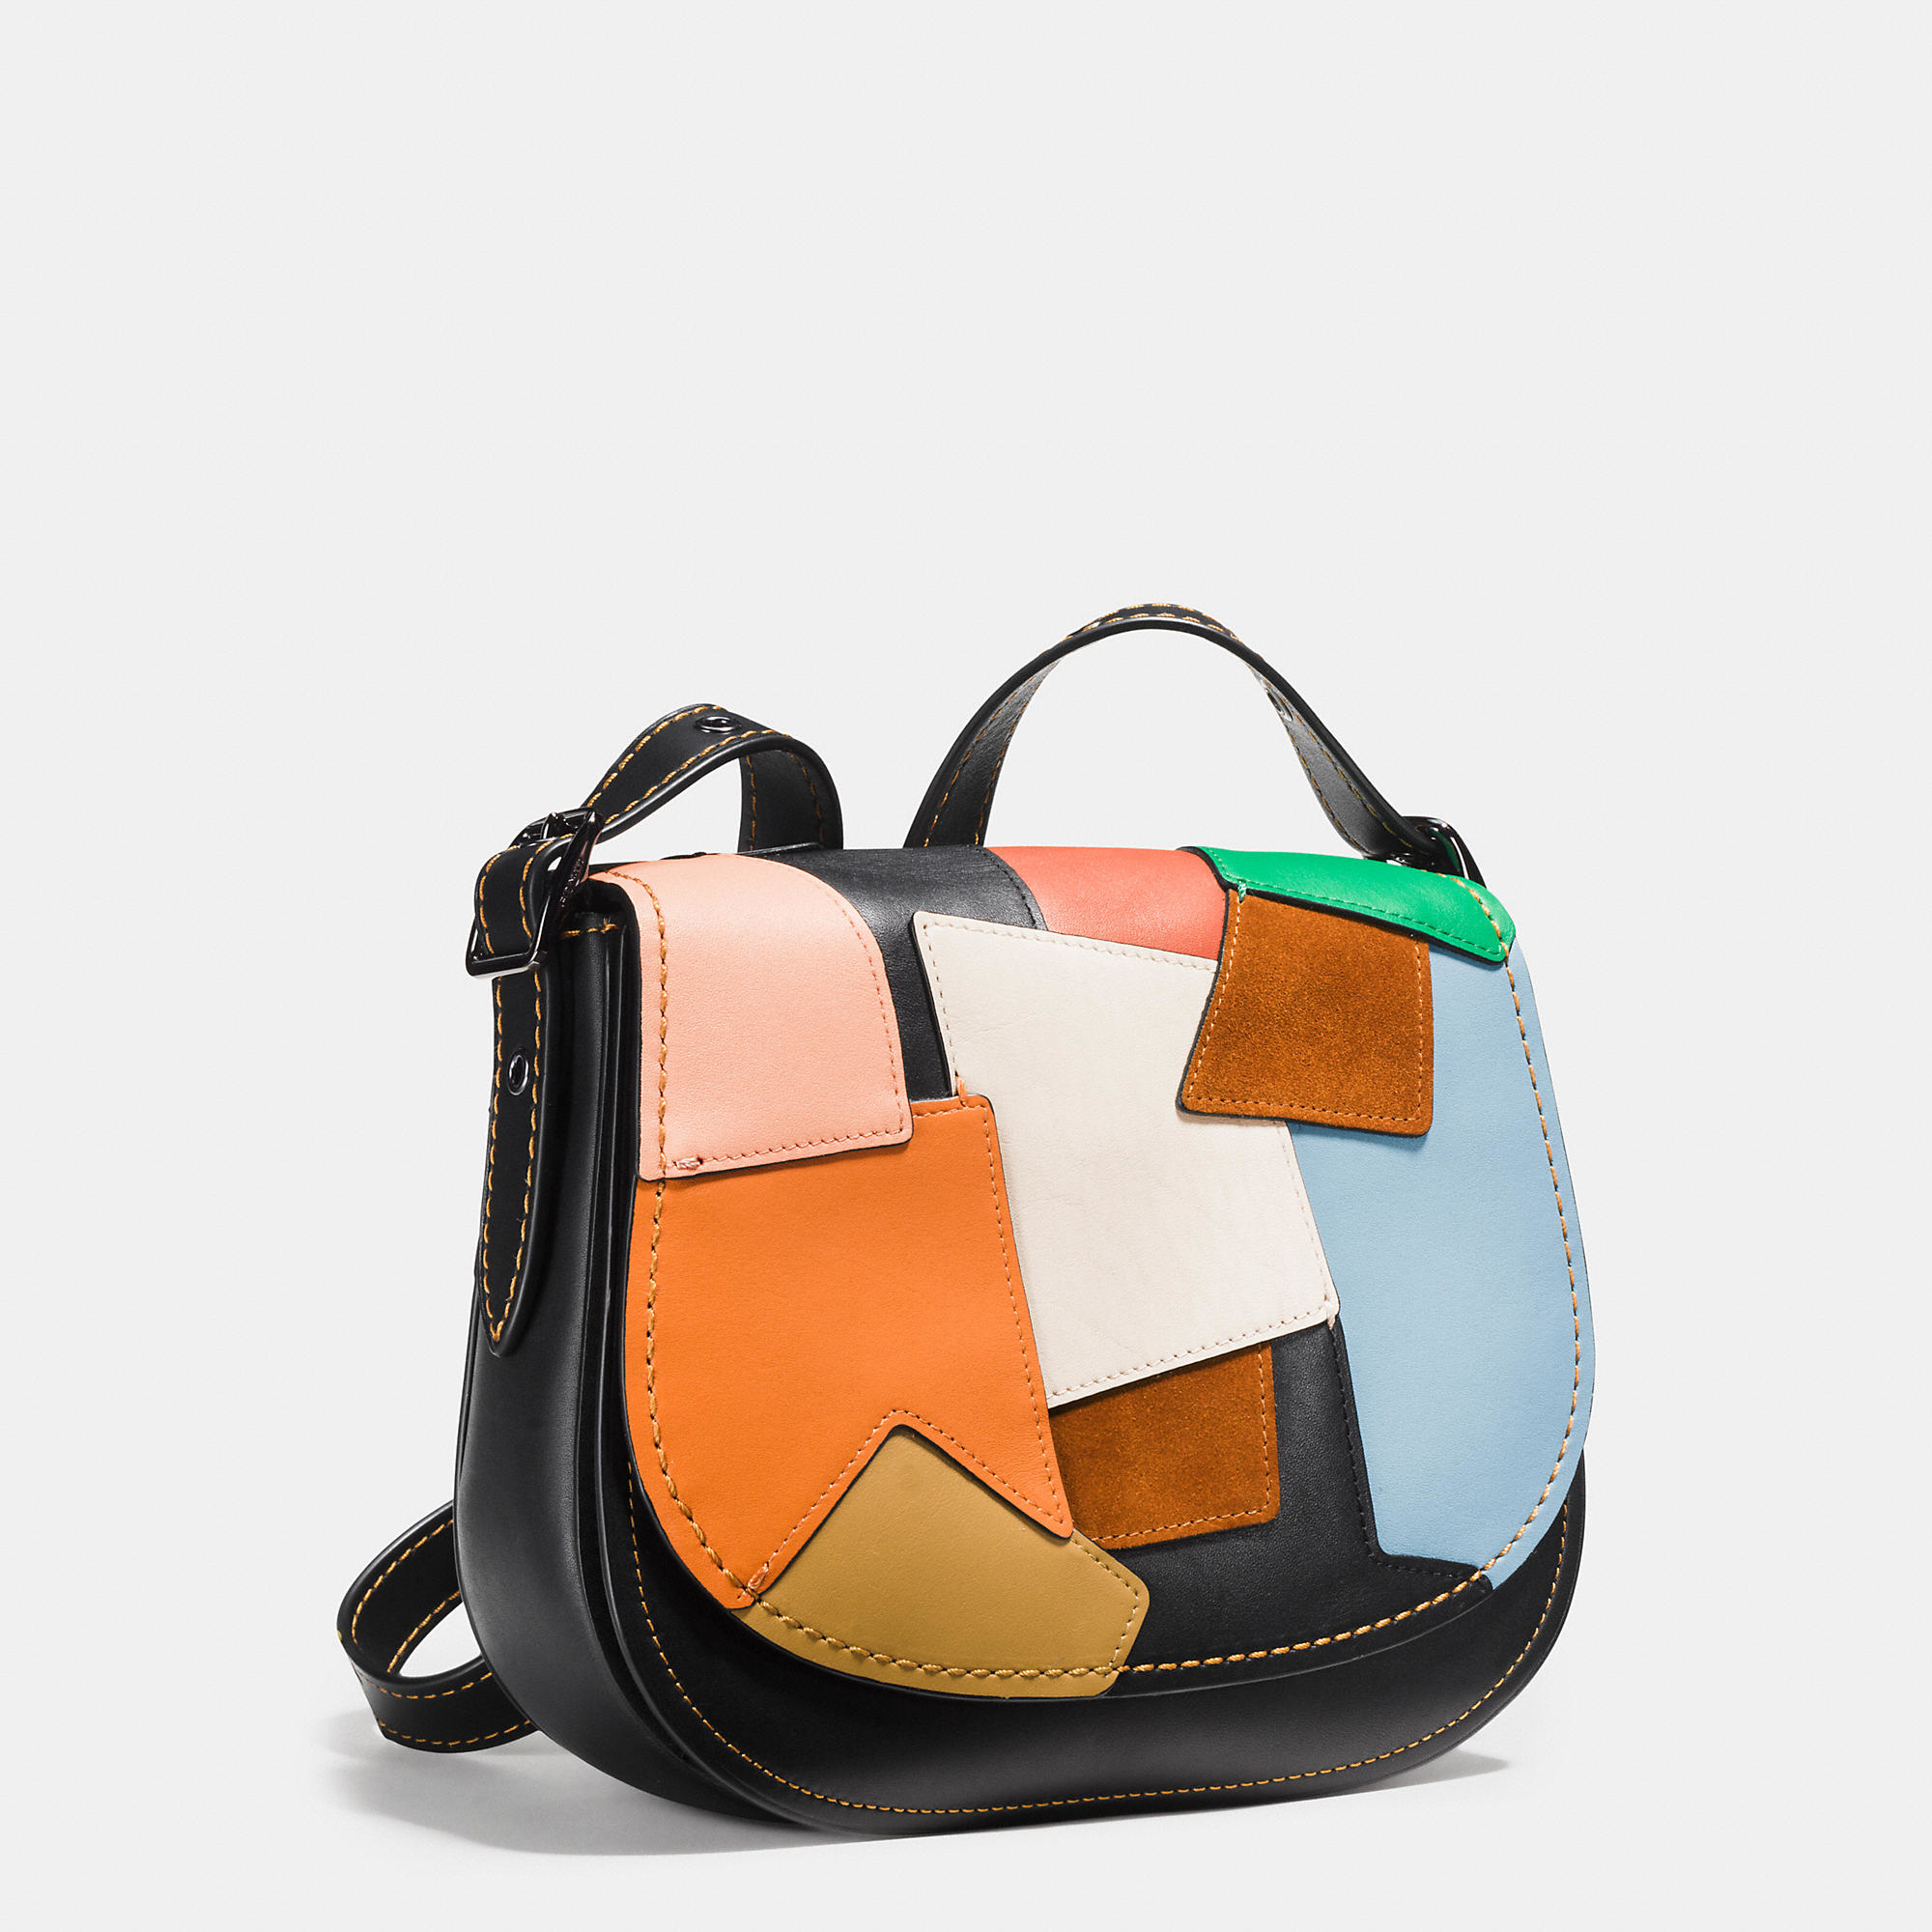 Lyst - Coach Saddle Bag 23 In Patchwork Leather in Black